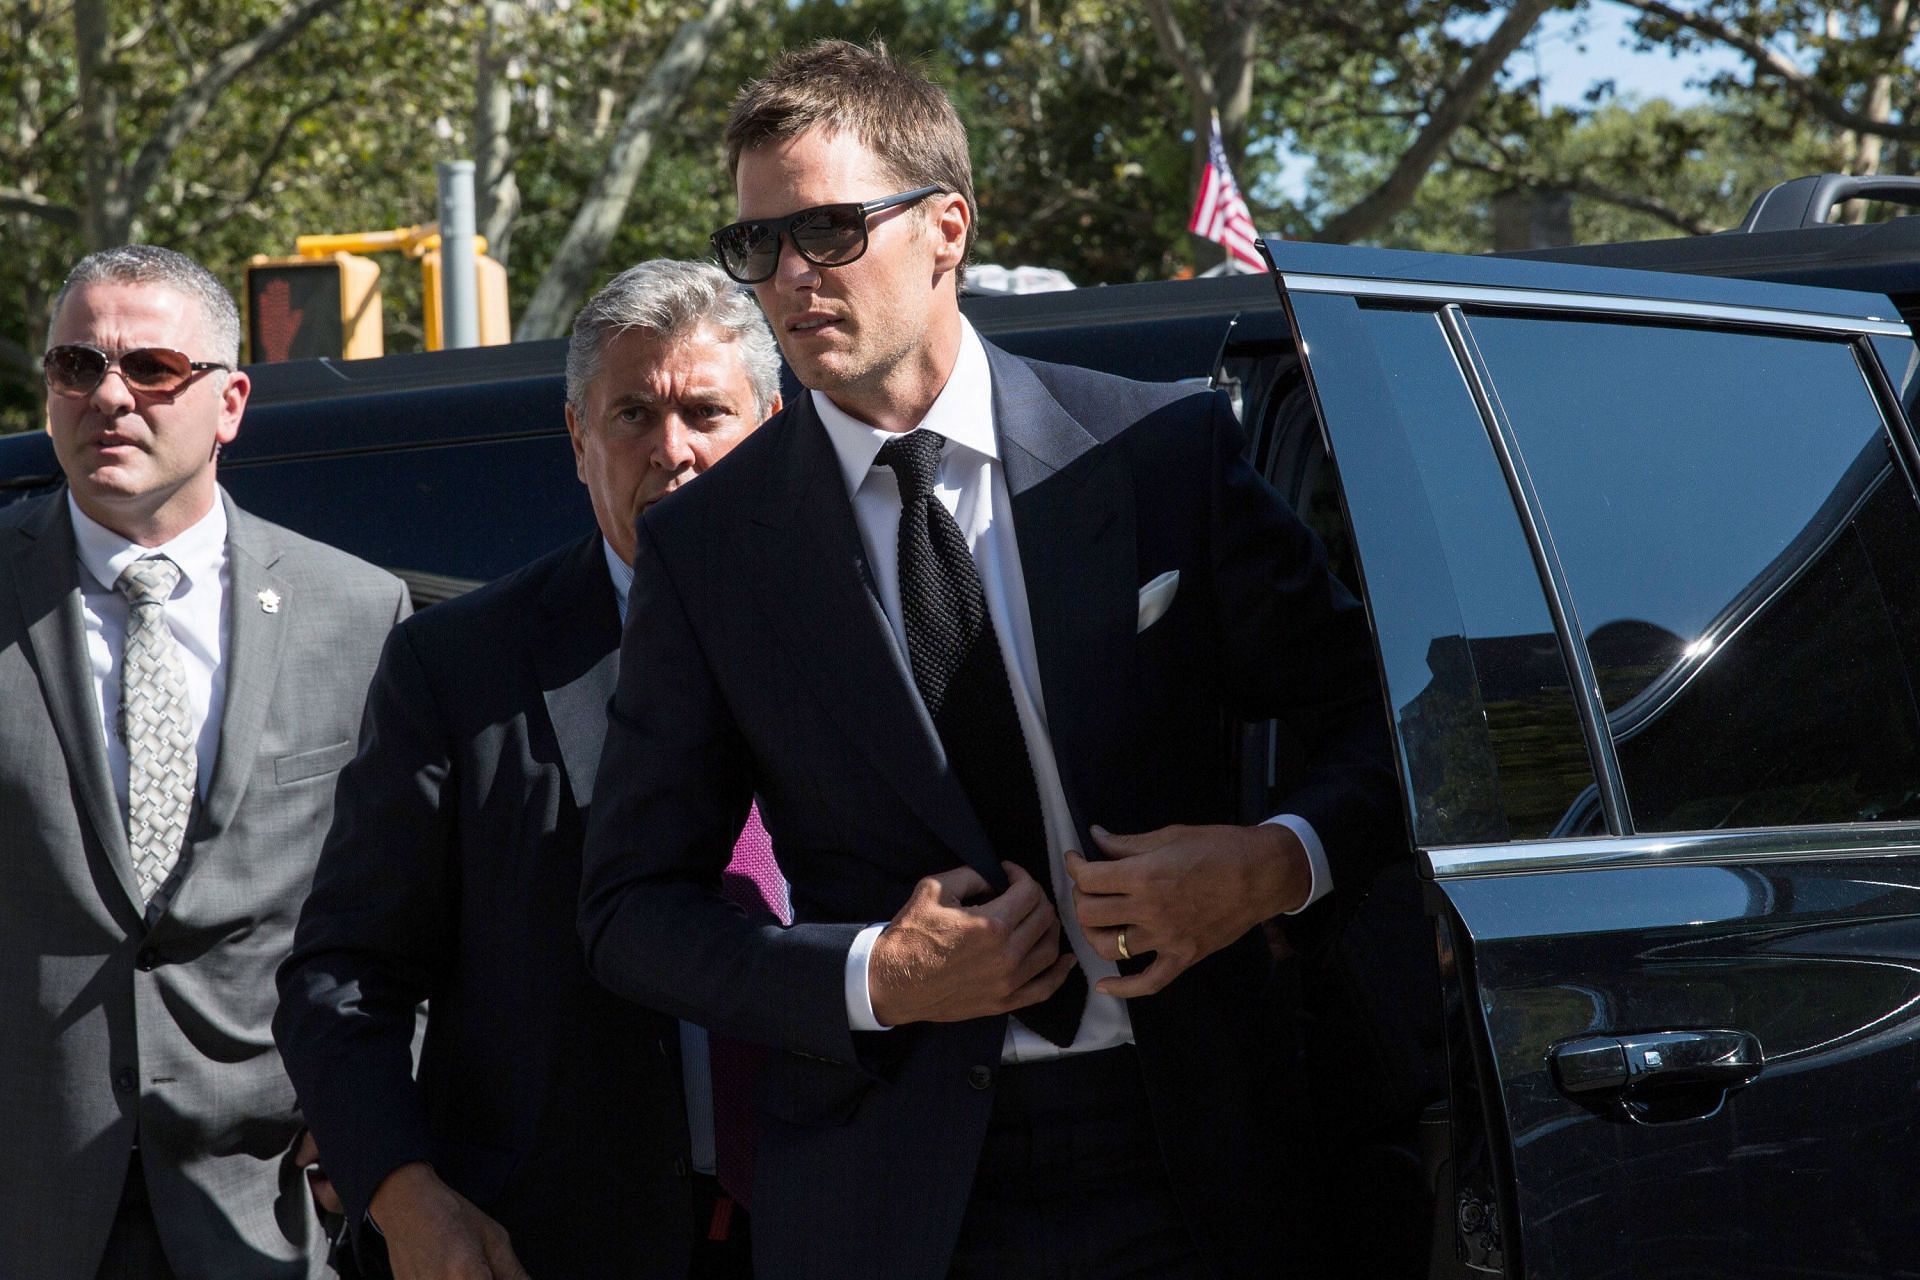 Tom Brady and Roger Goodell summoned to court in Deflategate case